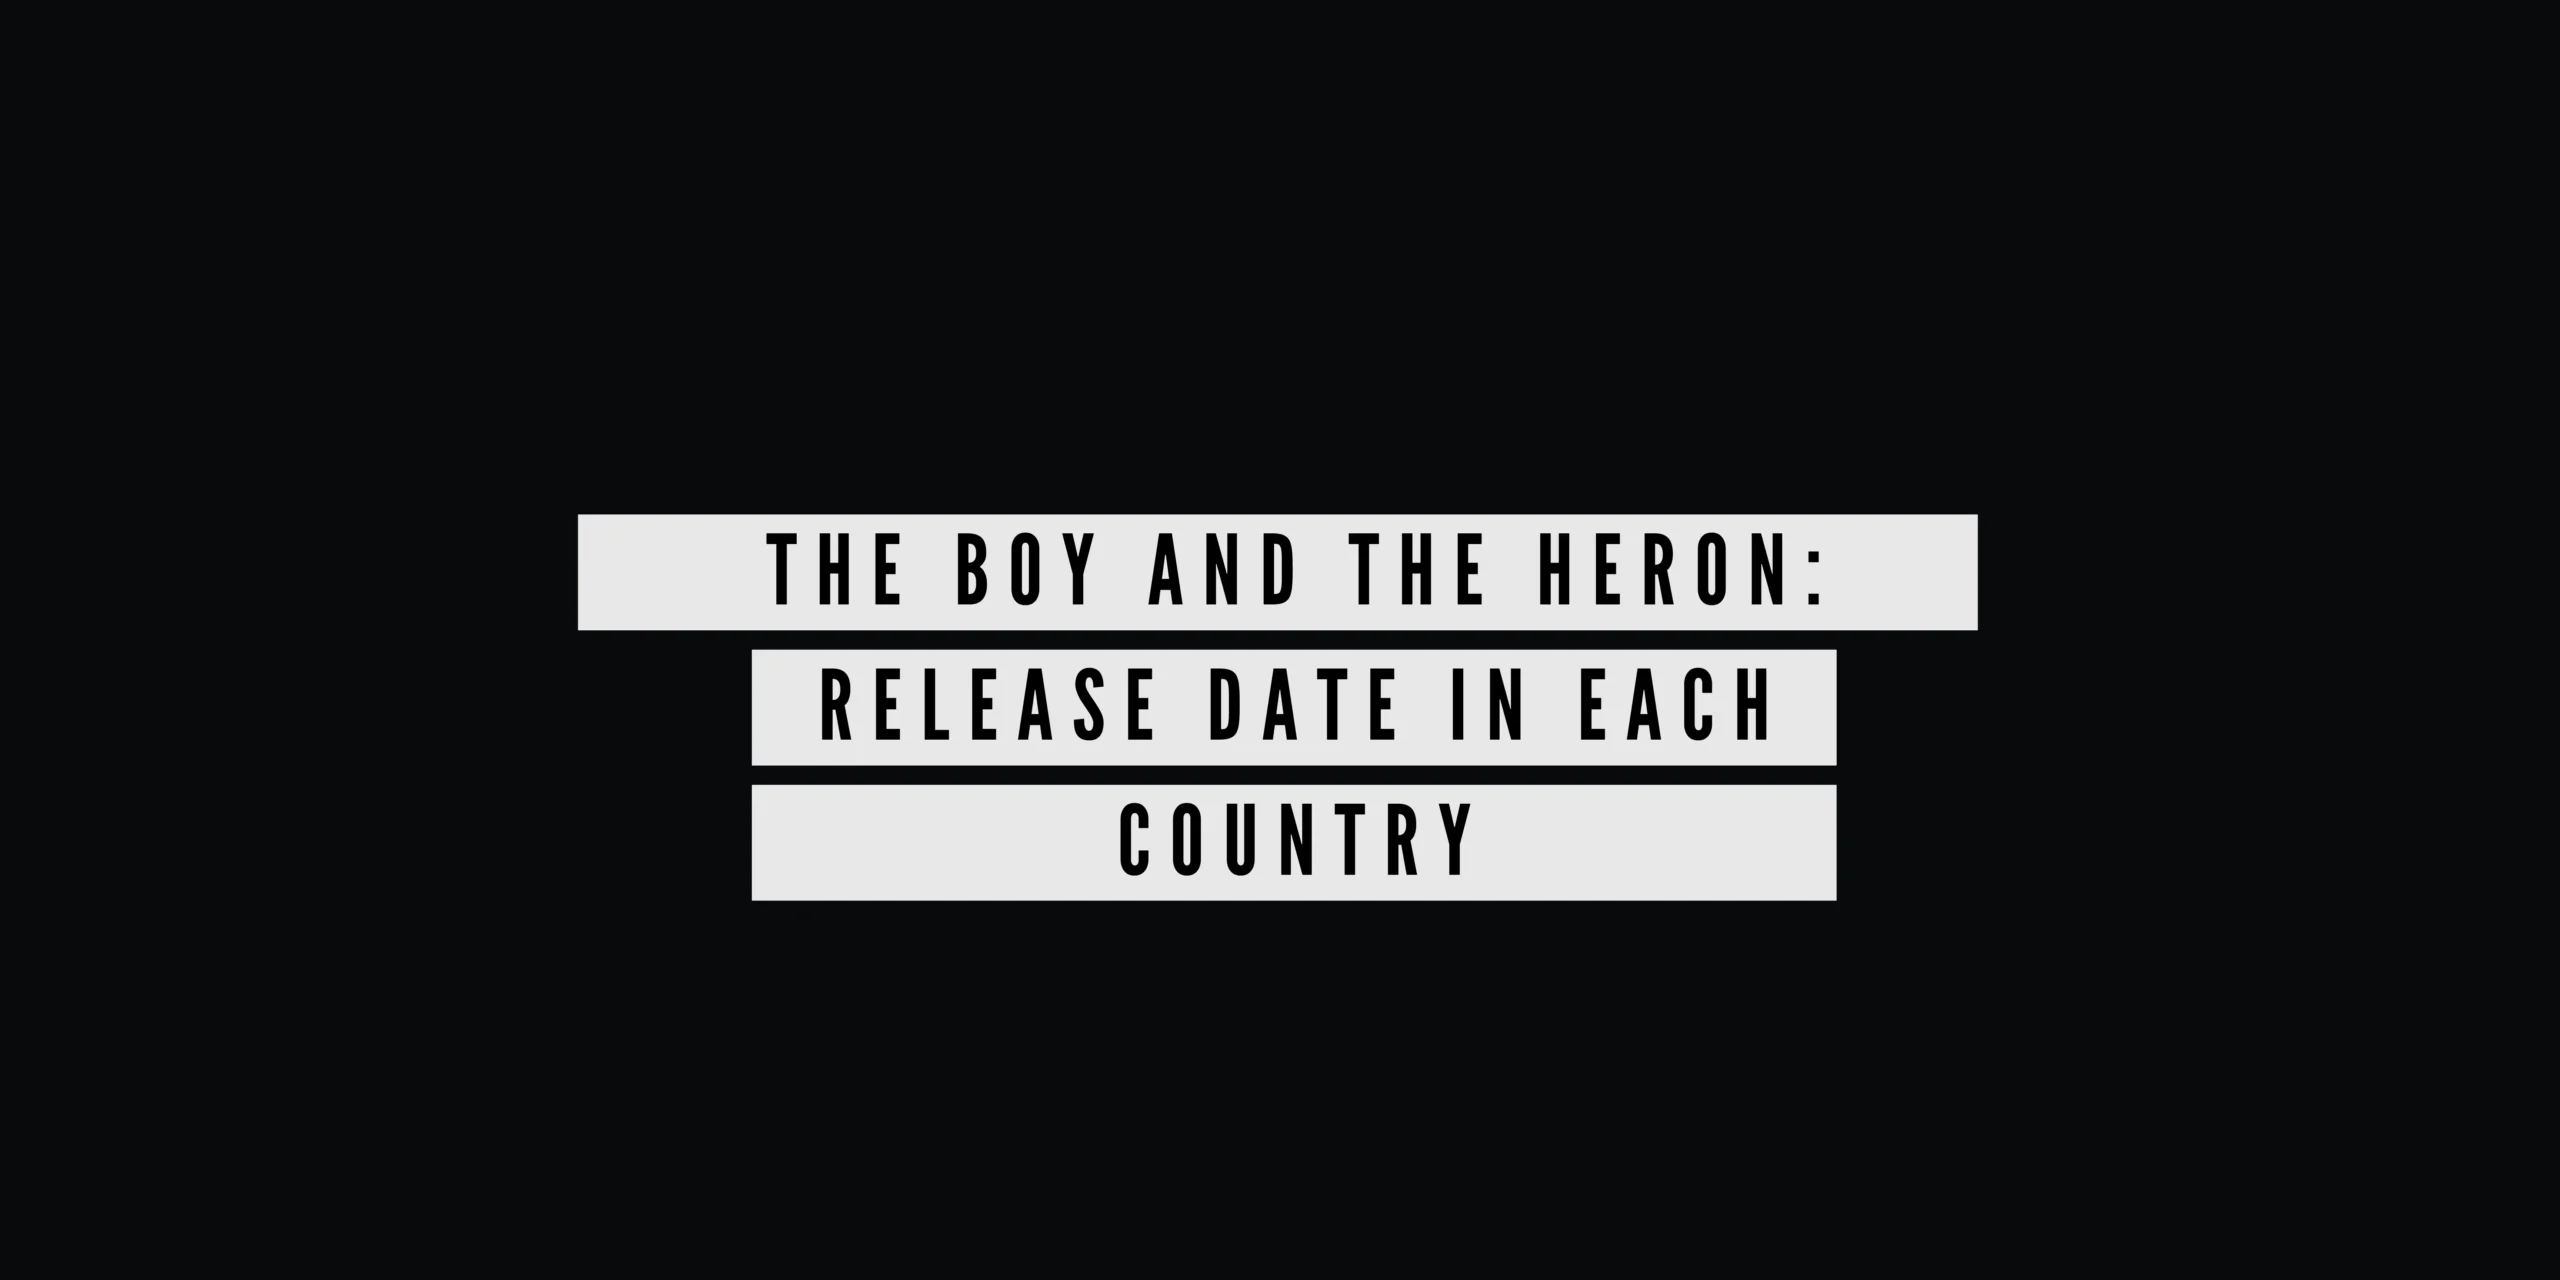 The Boy and the Heron Release Date In Each Country